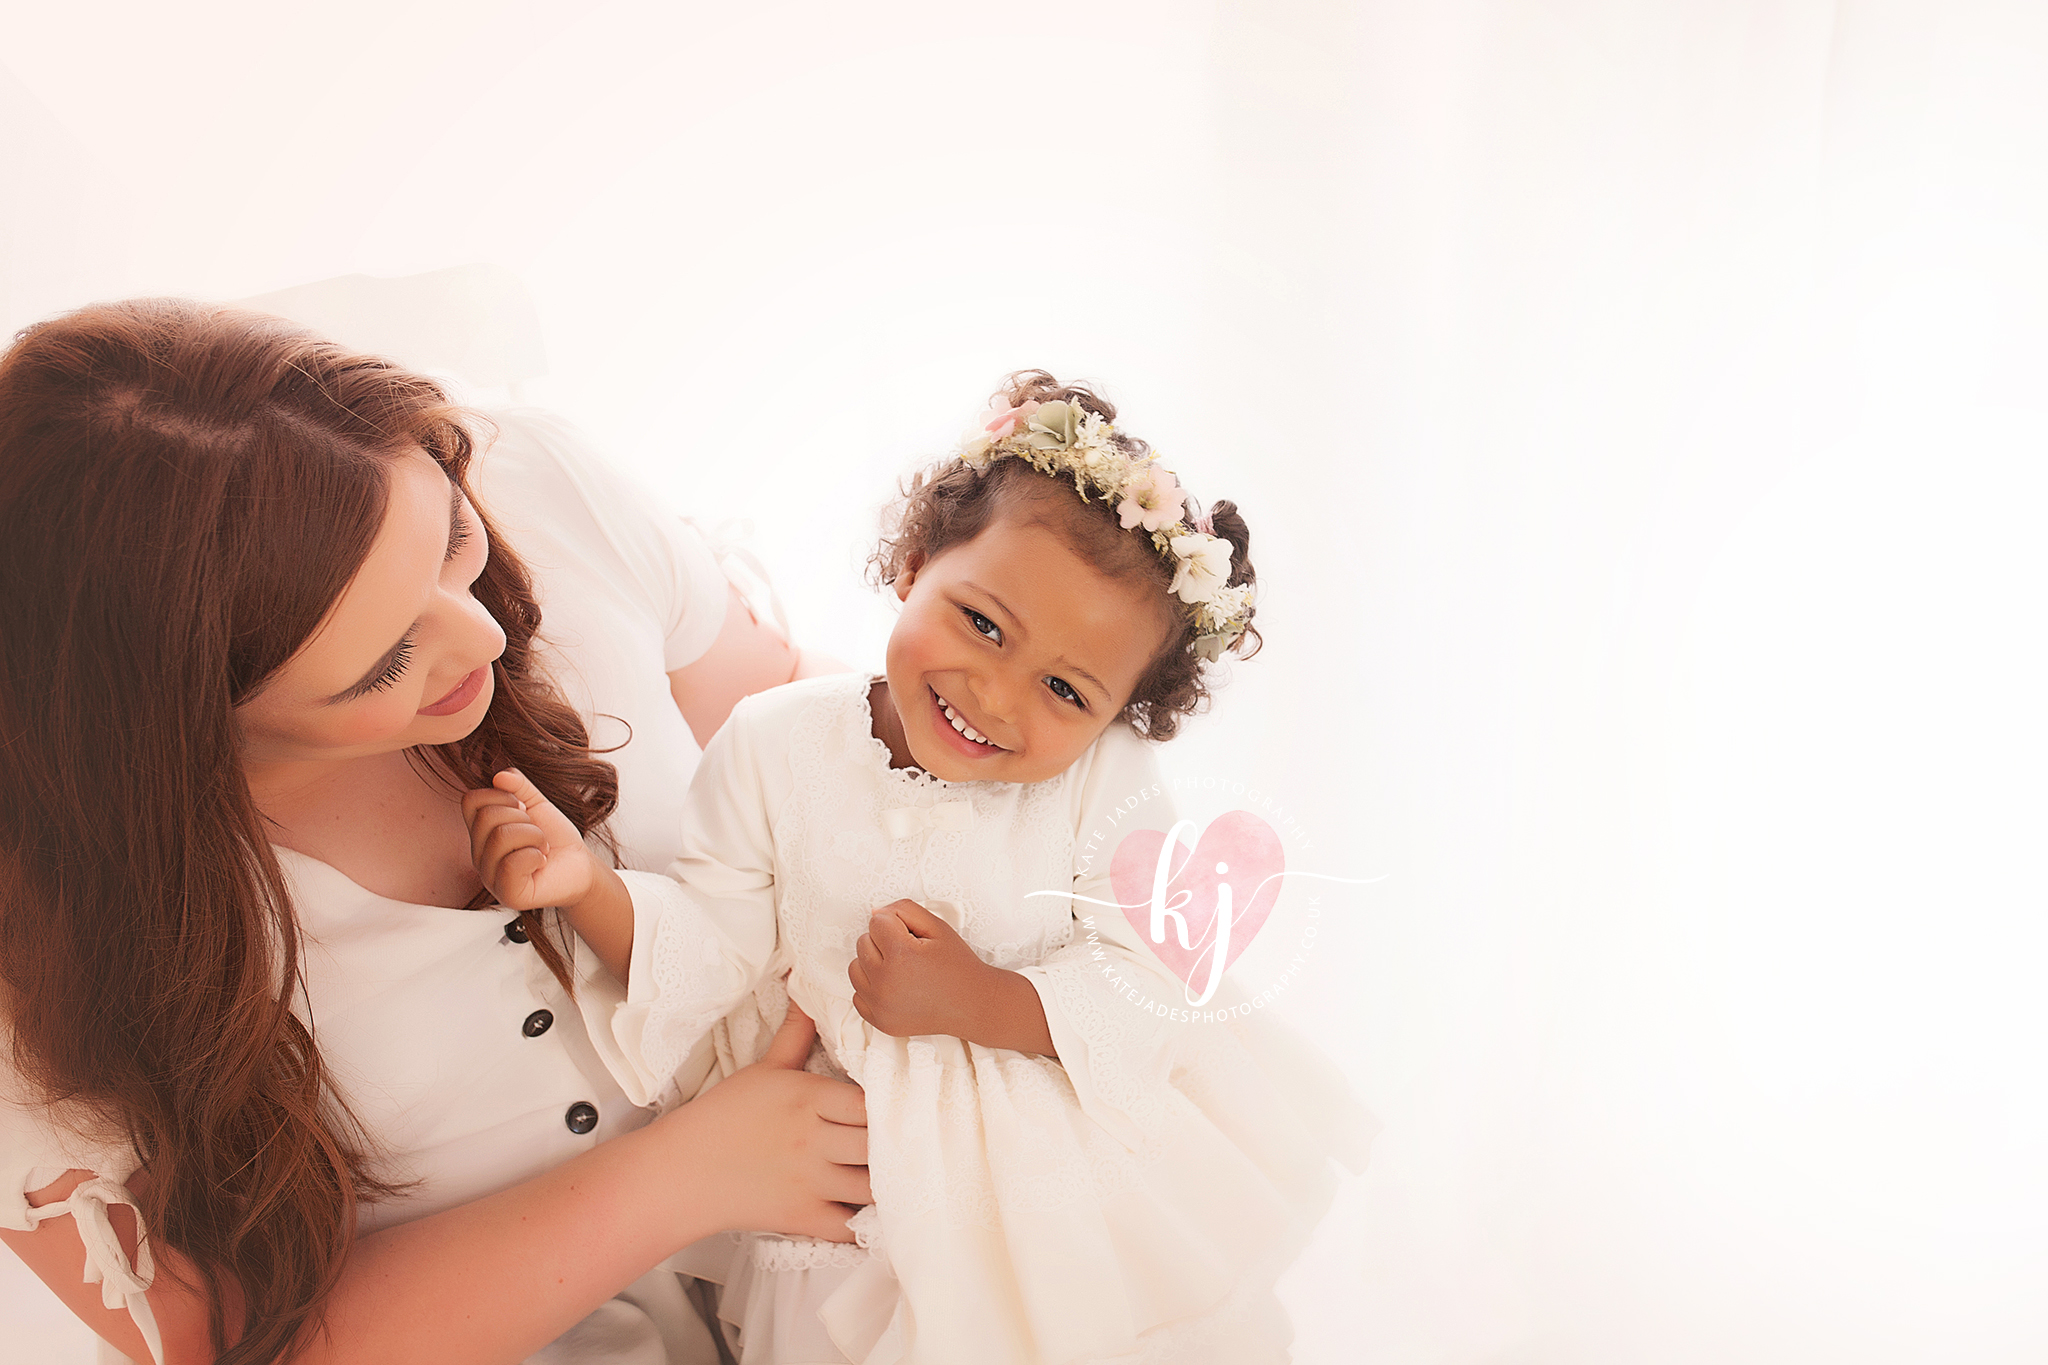 Mummy & Me Sessions Starting at £95